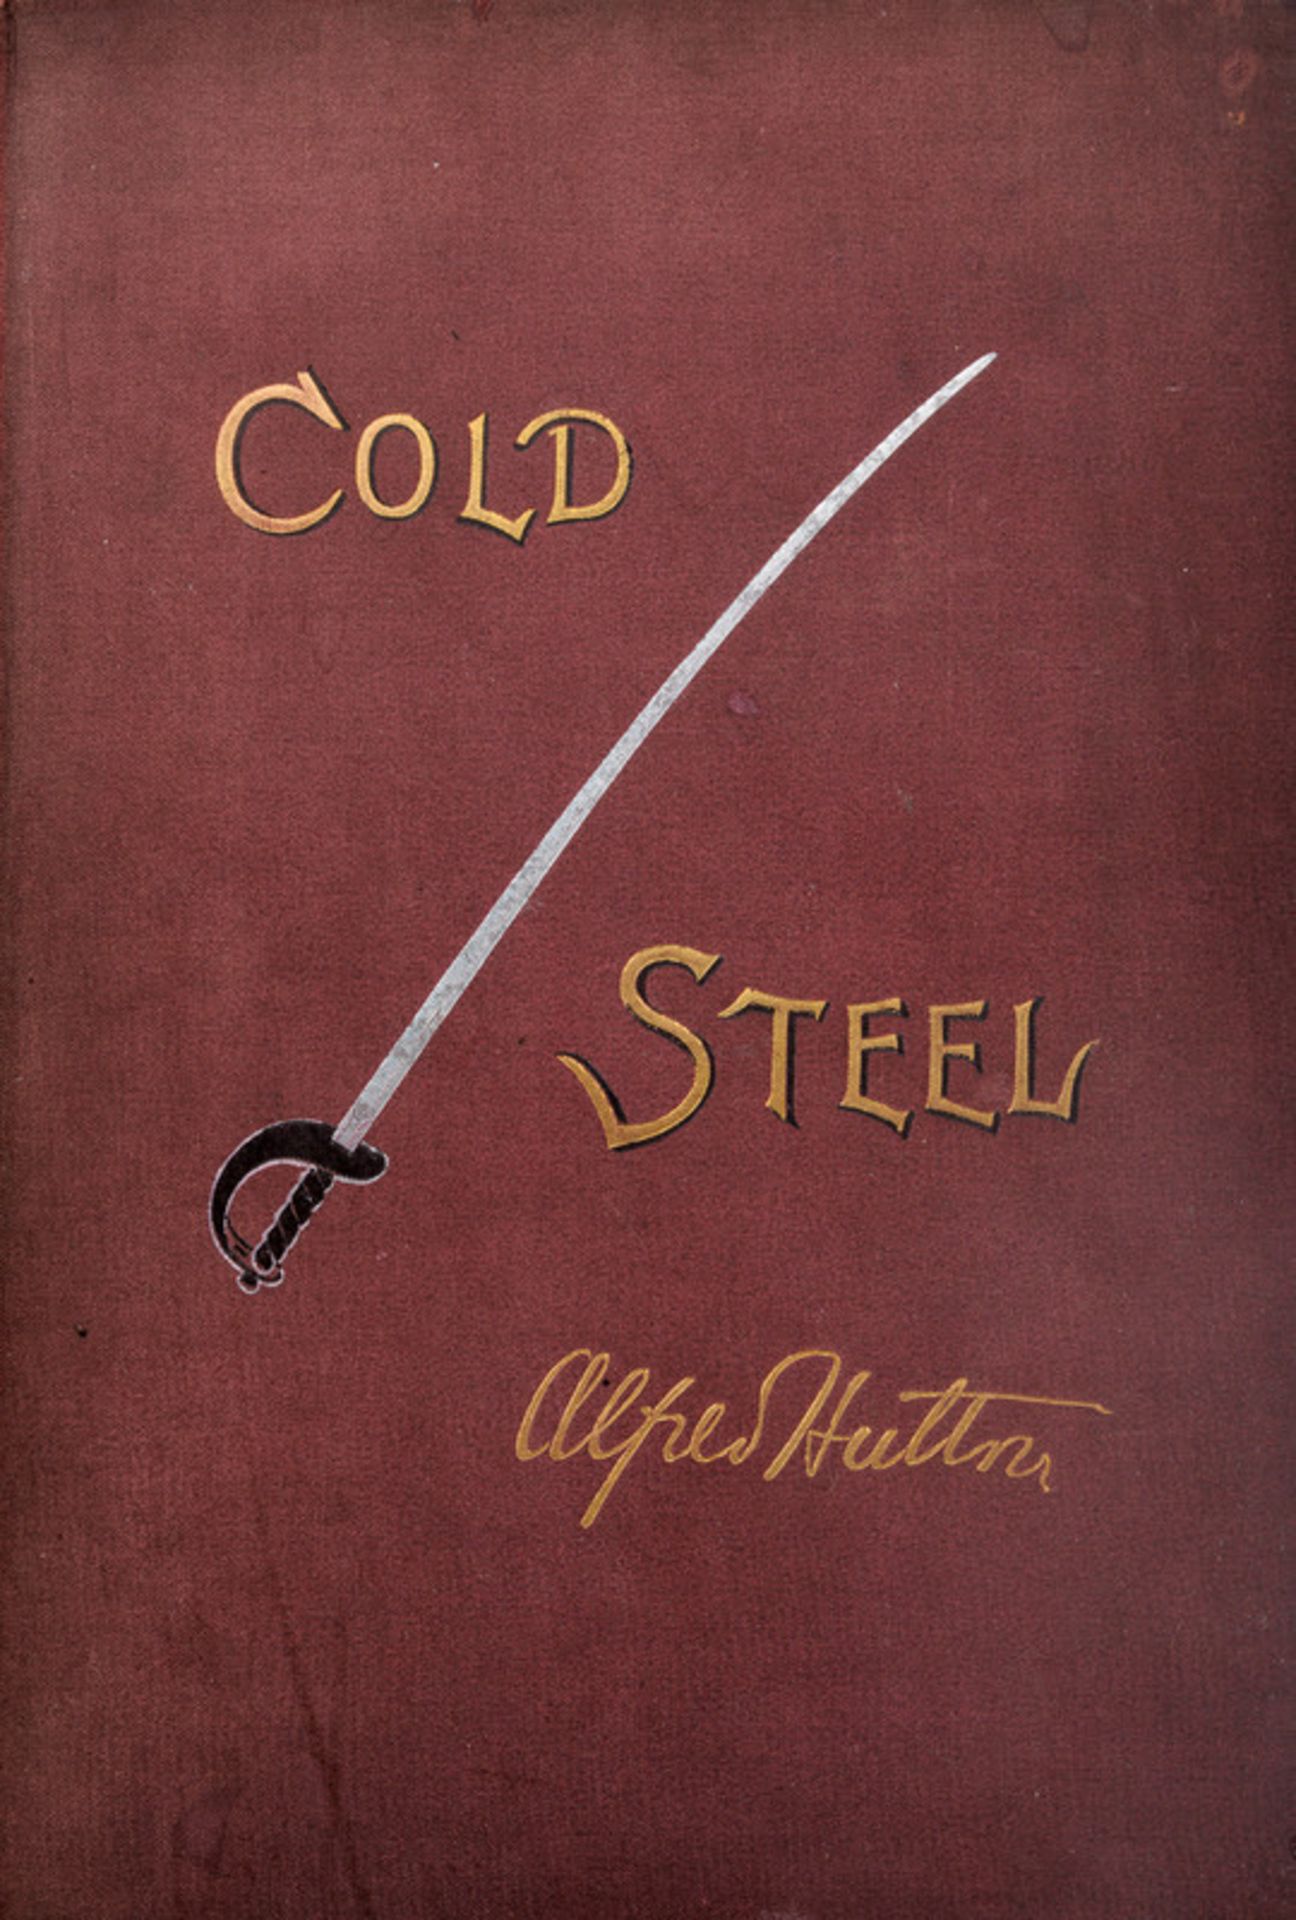 Hutton, Alfred dating: late 19th Century provenance: England "Cold Steel"; London, William Clowes